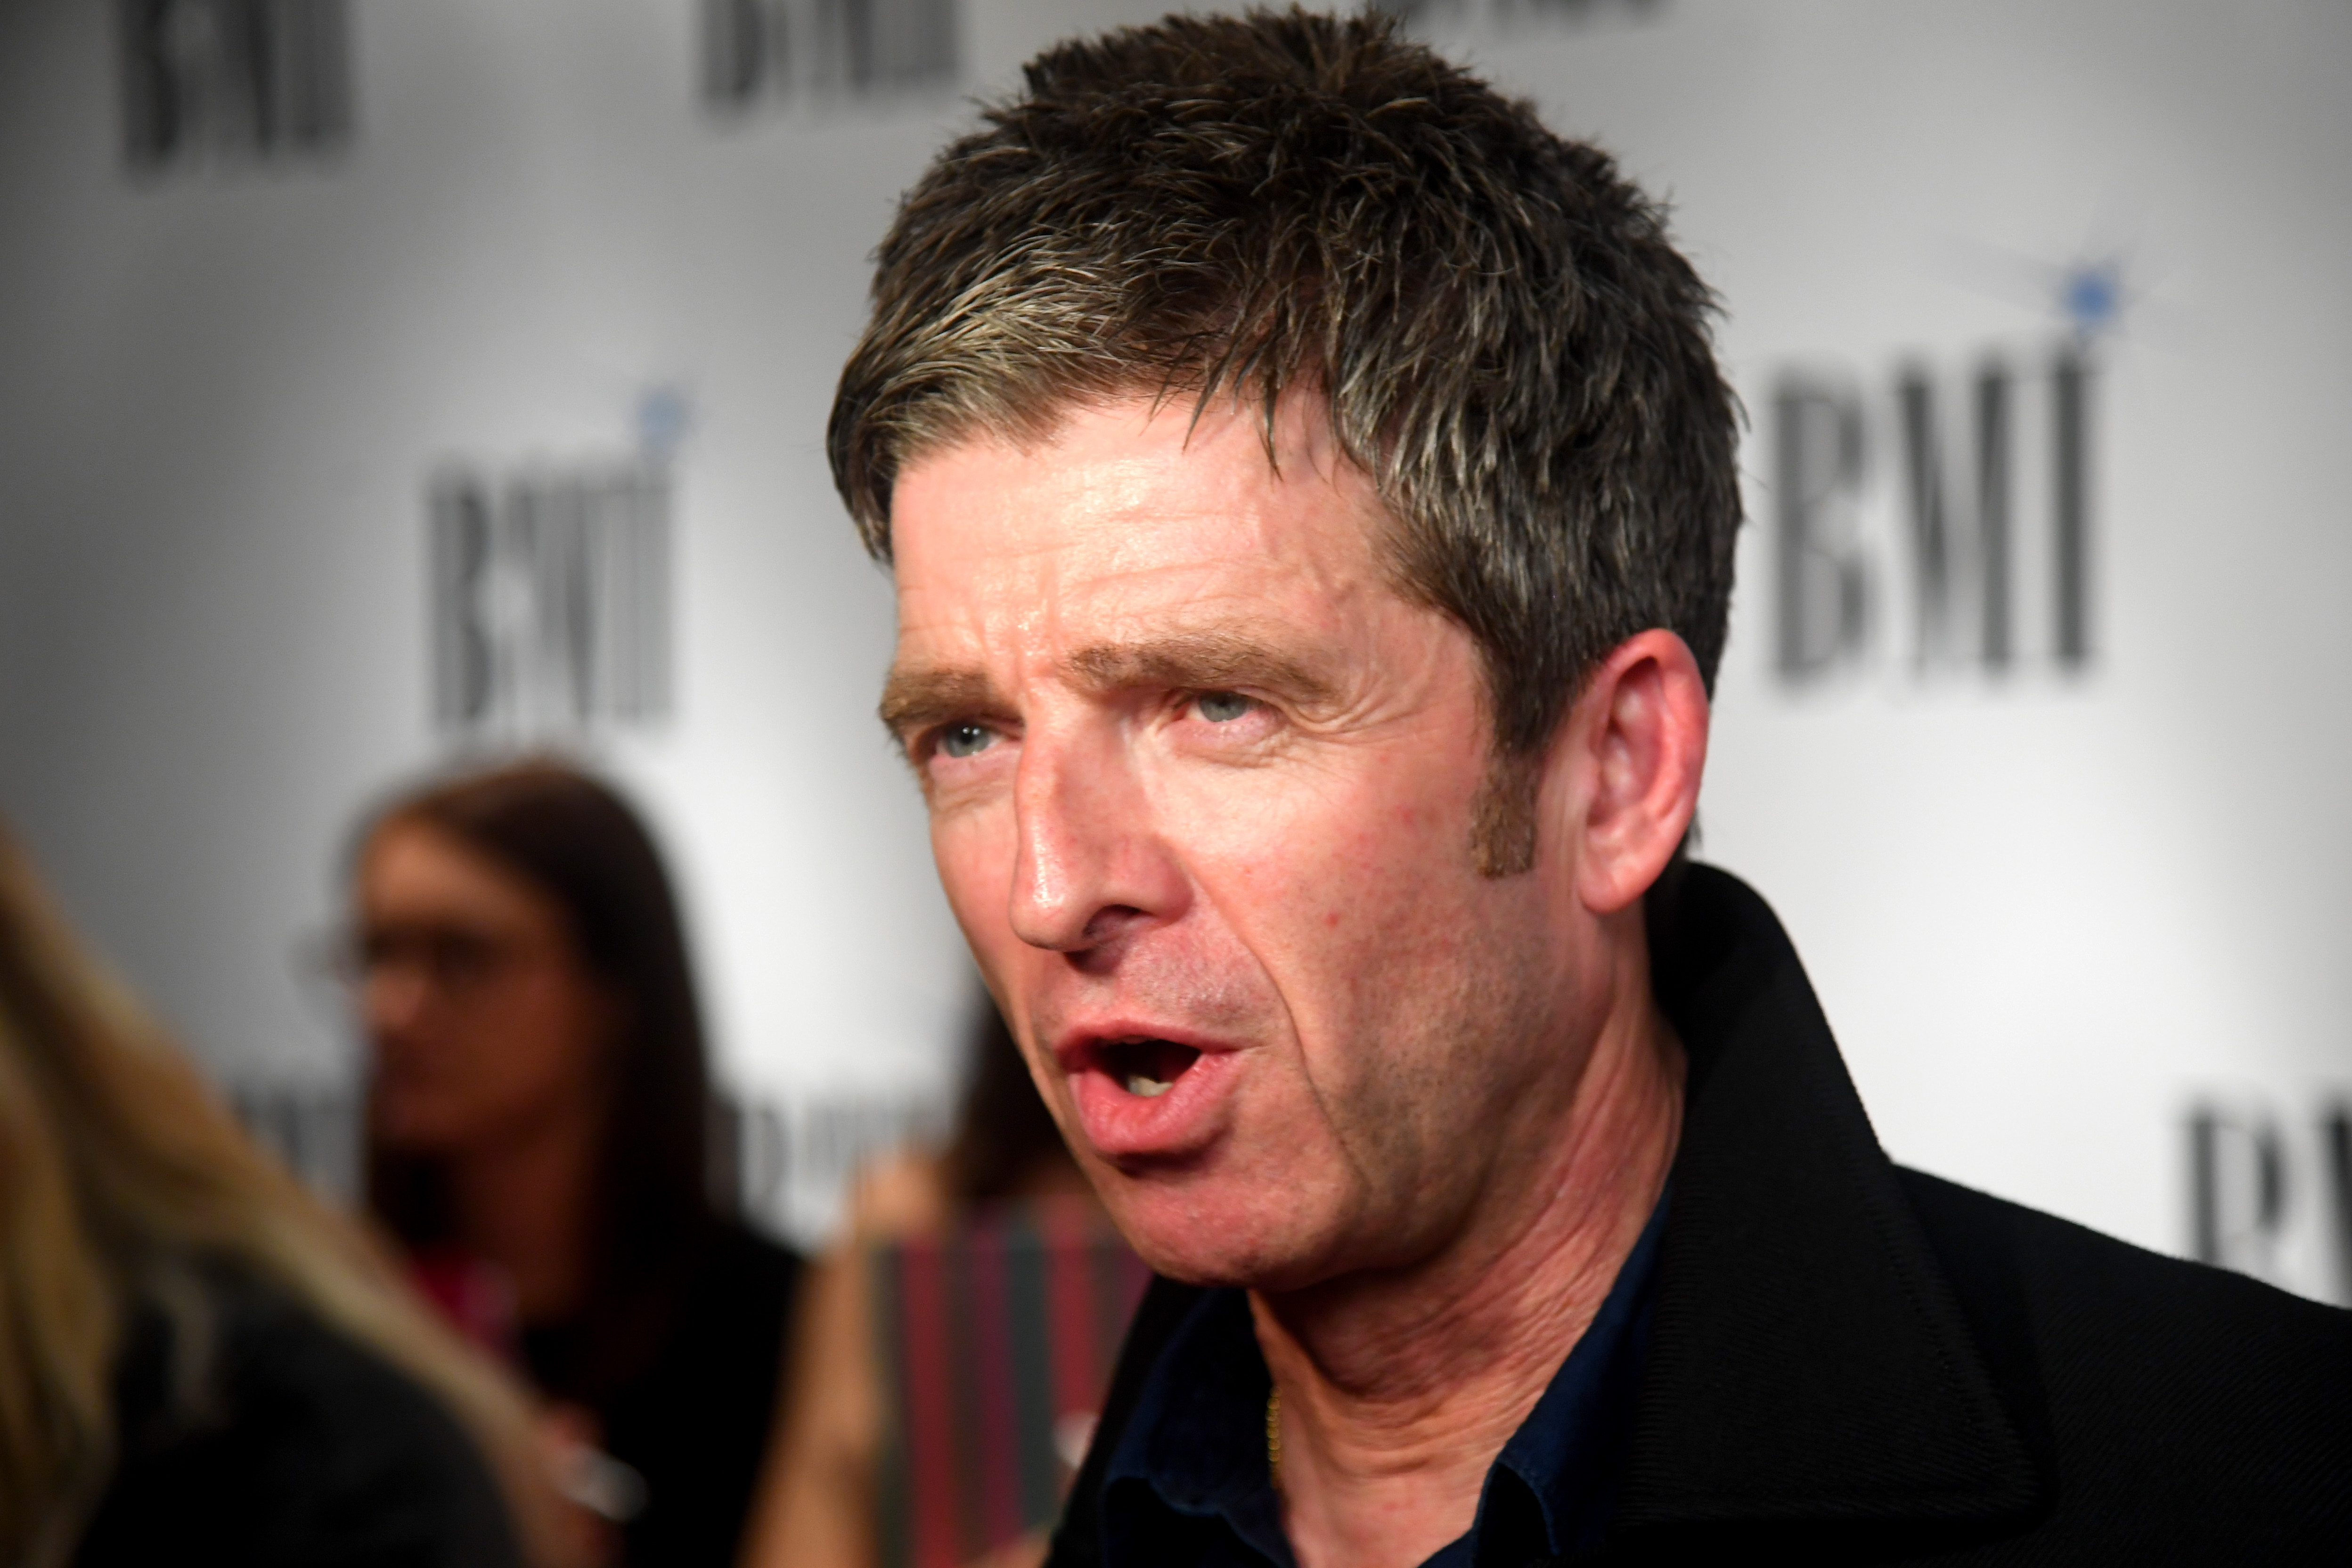 Noel Gallagher attends the 2019 BMI London Awards at The Savoy Hotel on October 21, 2019 in London